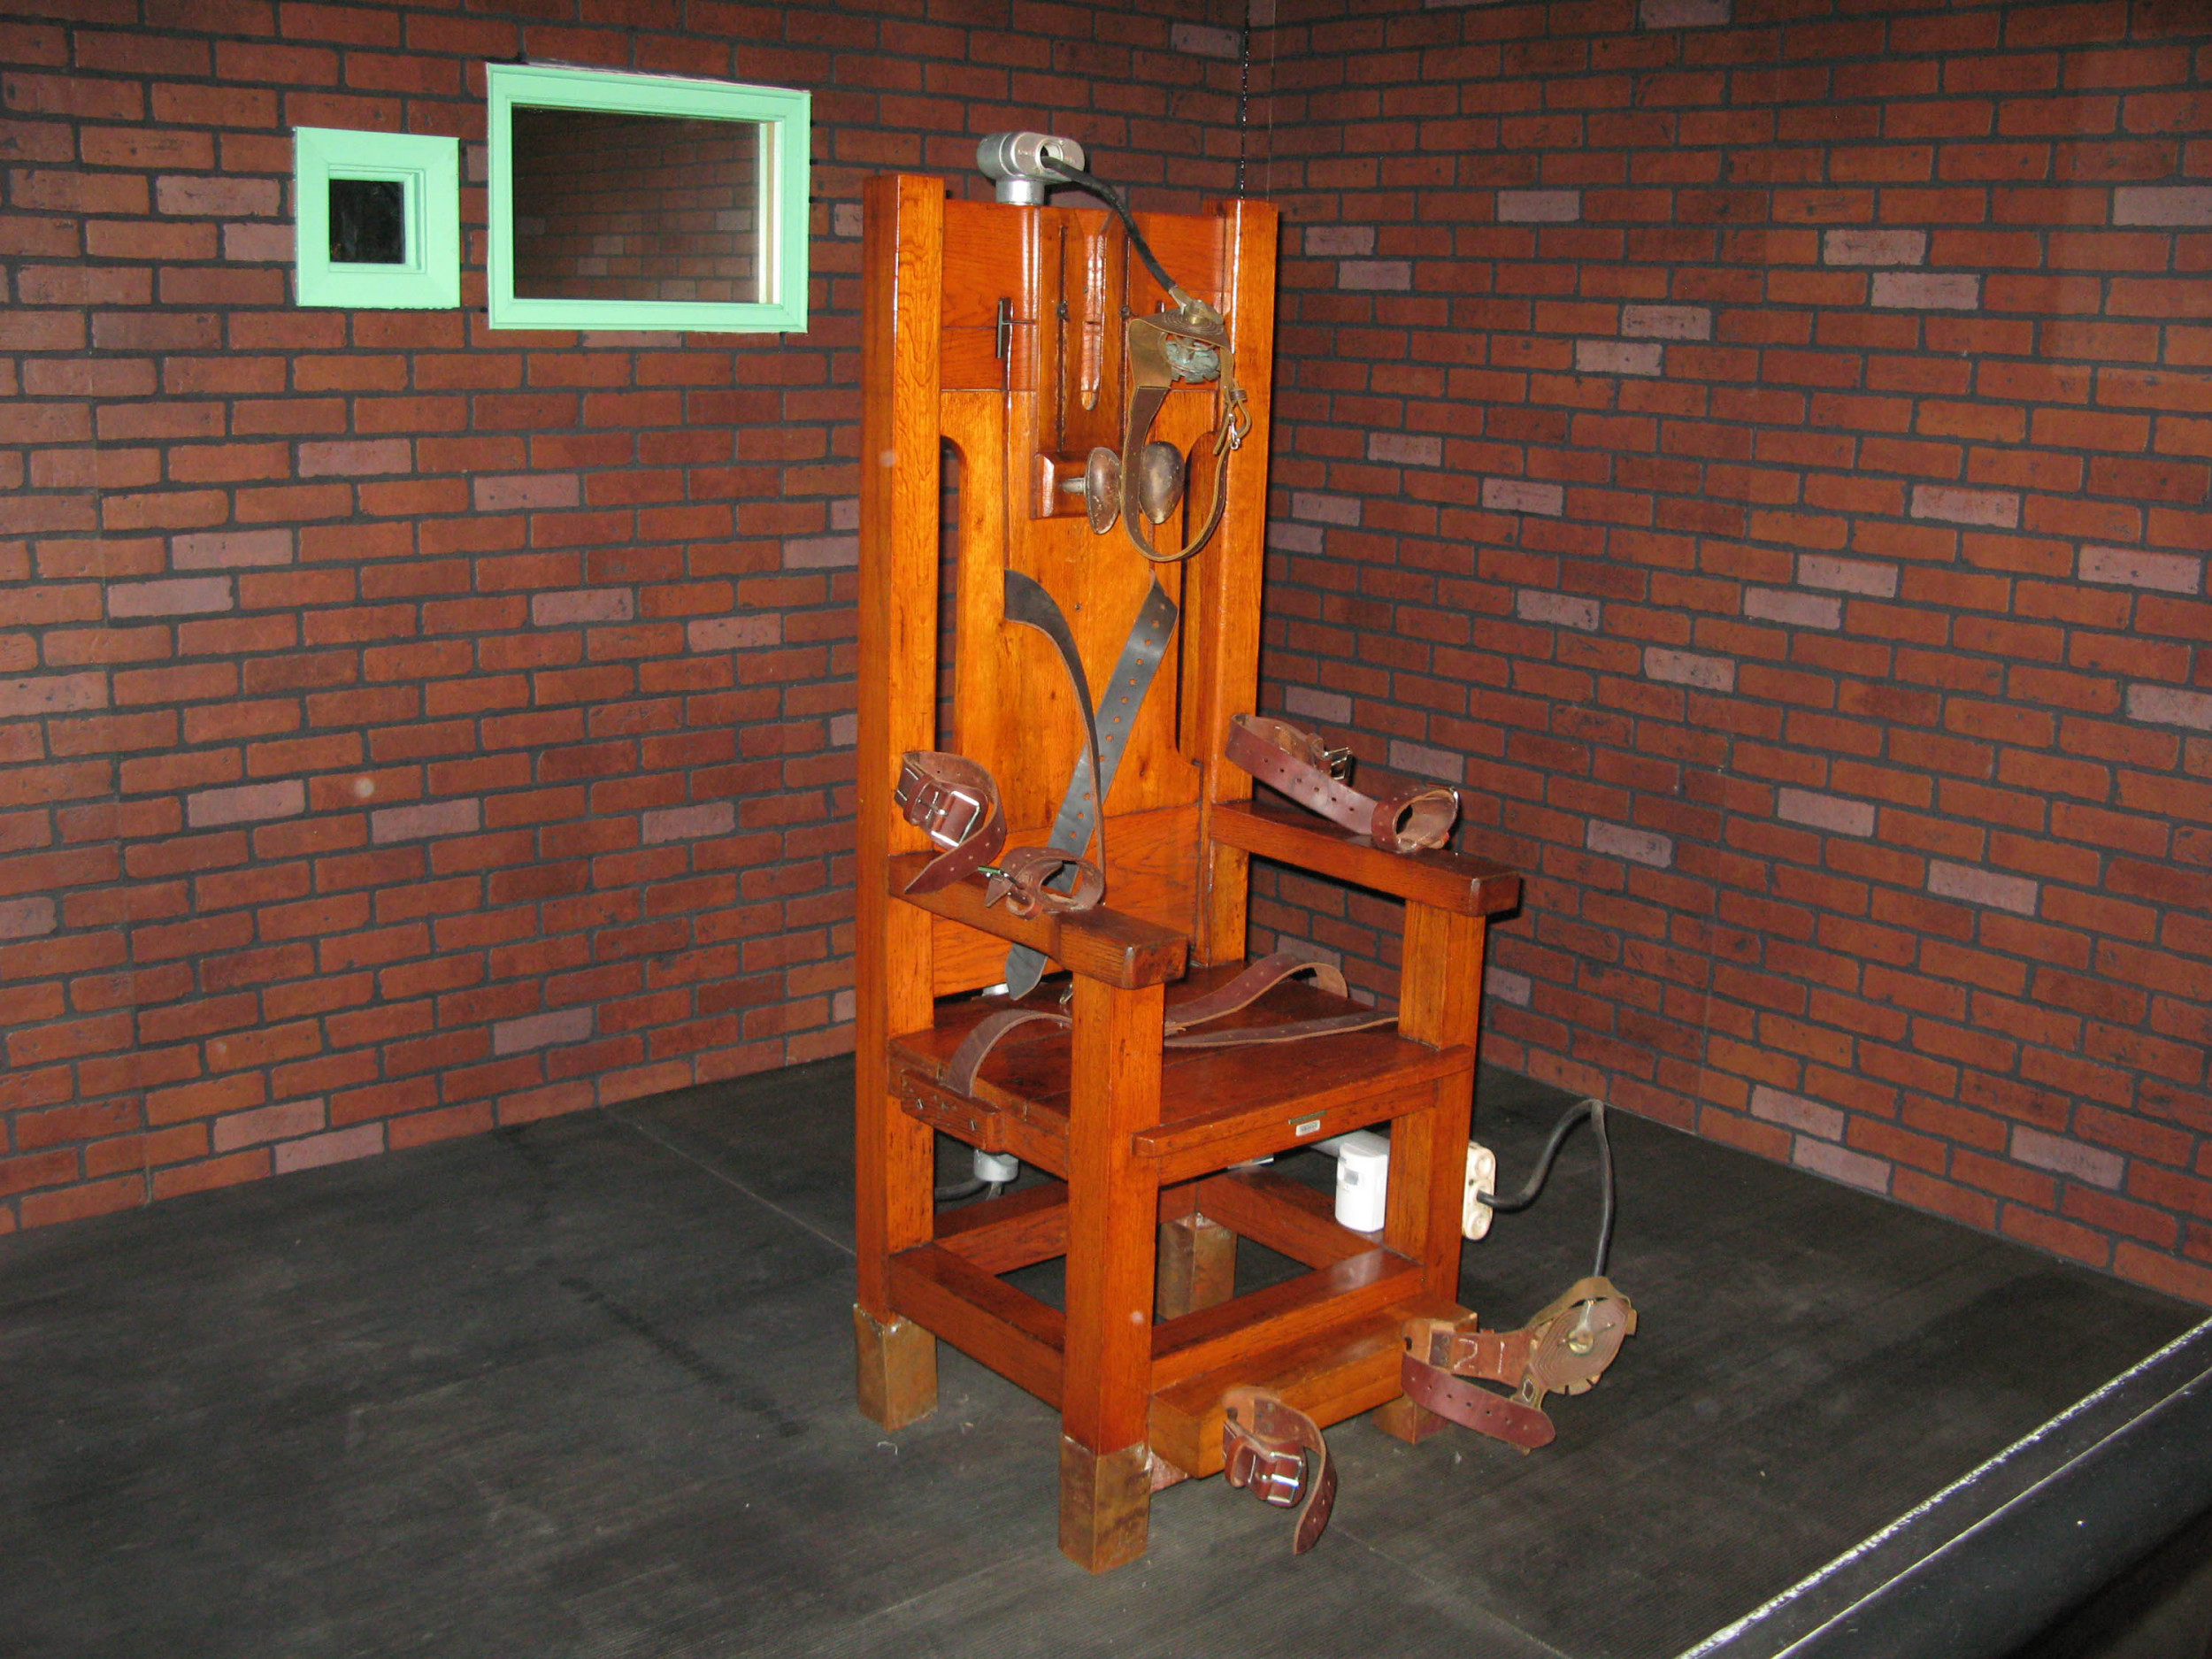 Today in History: William Kemmler Became the First Person Executed by Electric Chair 129 Years Ago